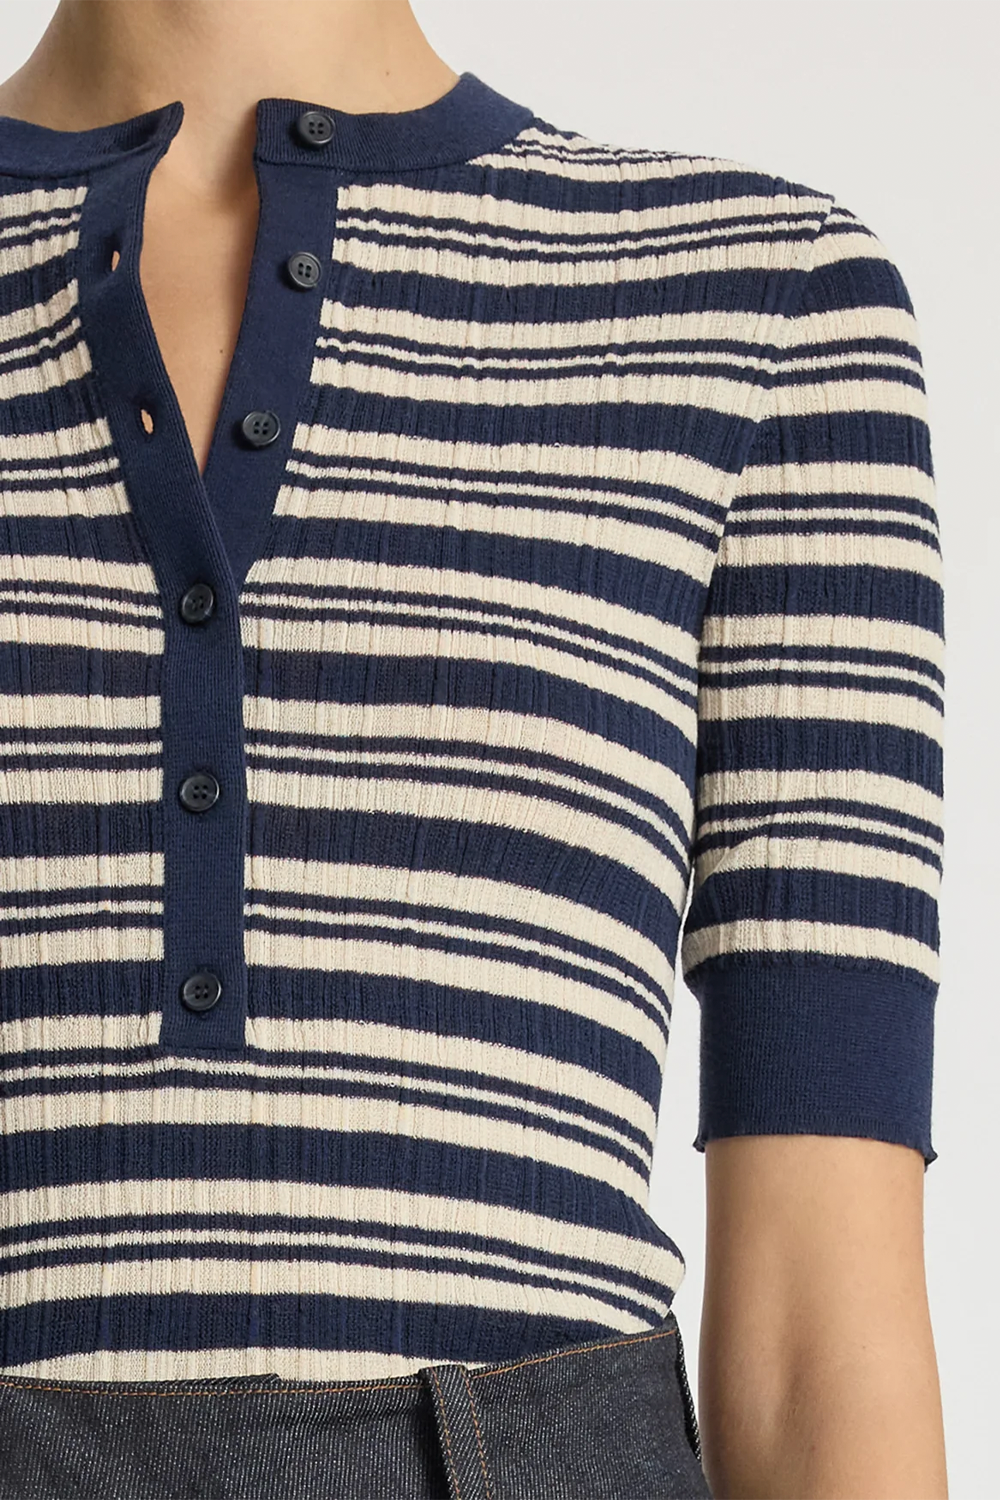 Fisher Fine Cotton Knit Top Navy/White